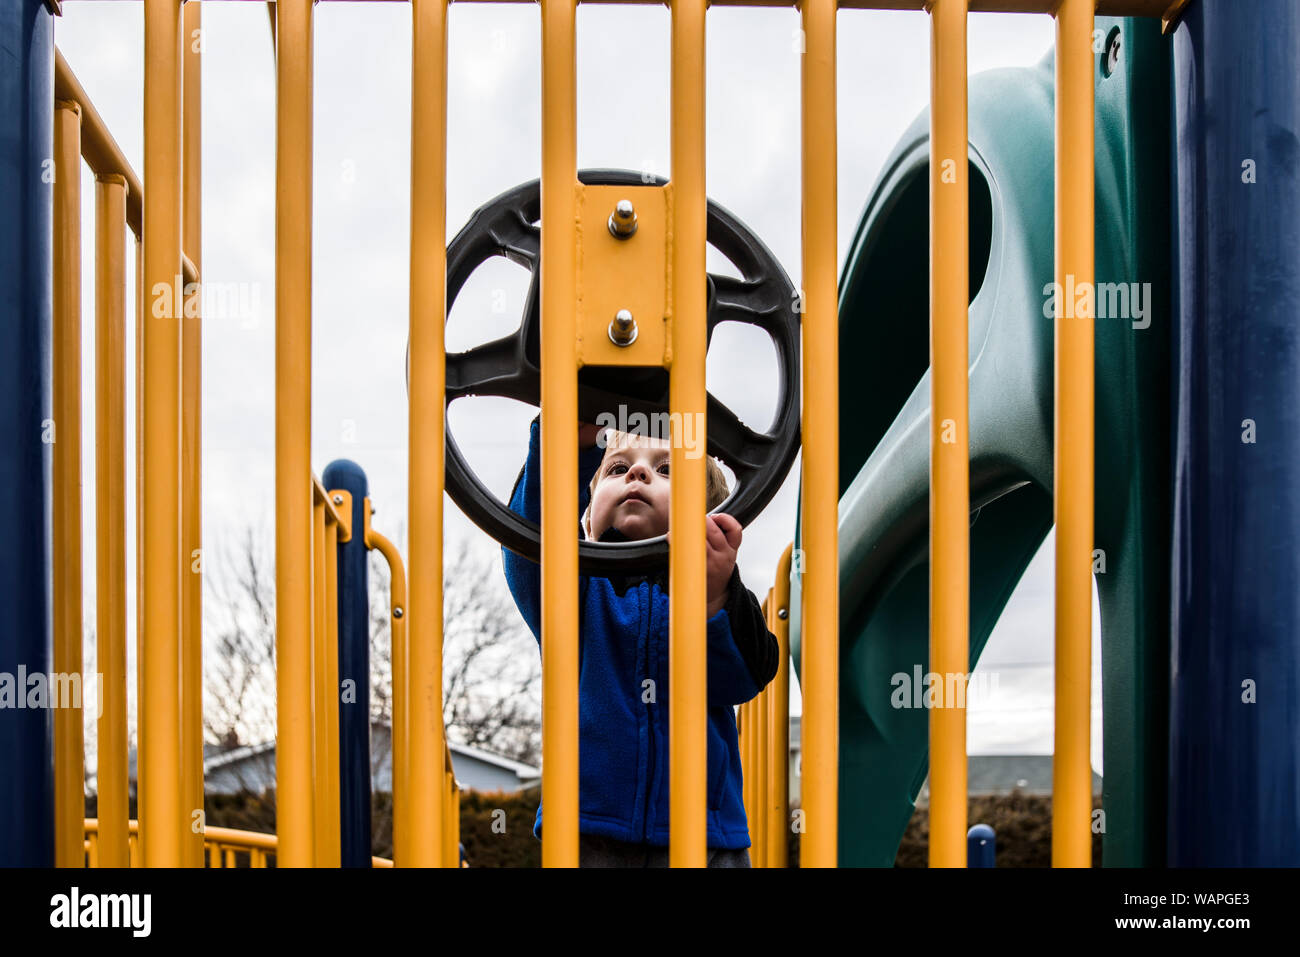 Toddler on playground looking curiously at play steering wheel Stock Photo